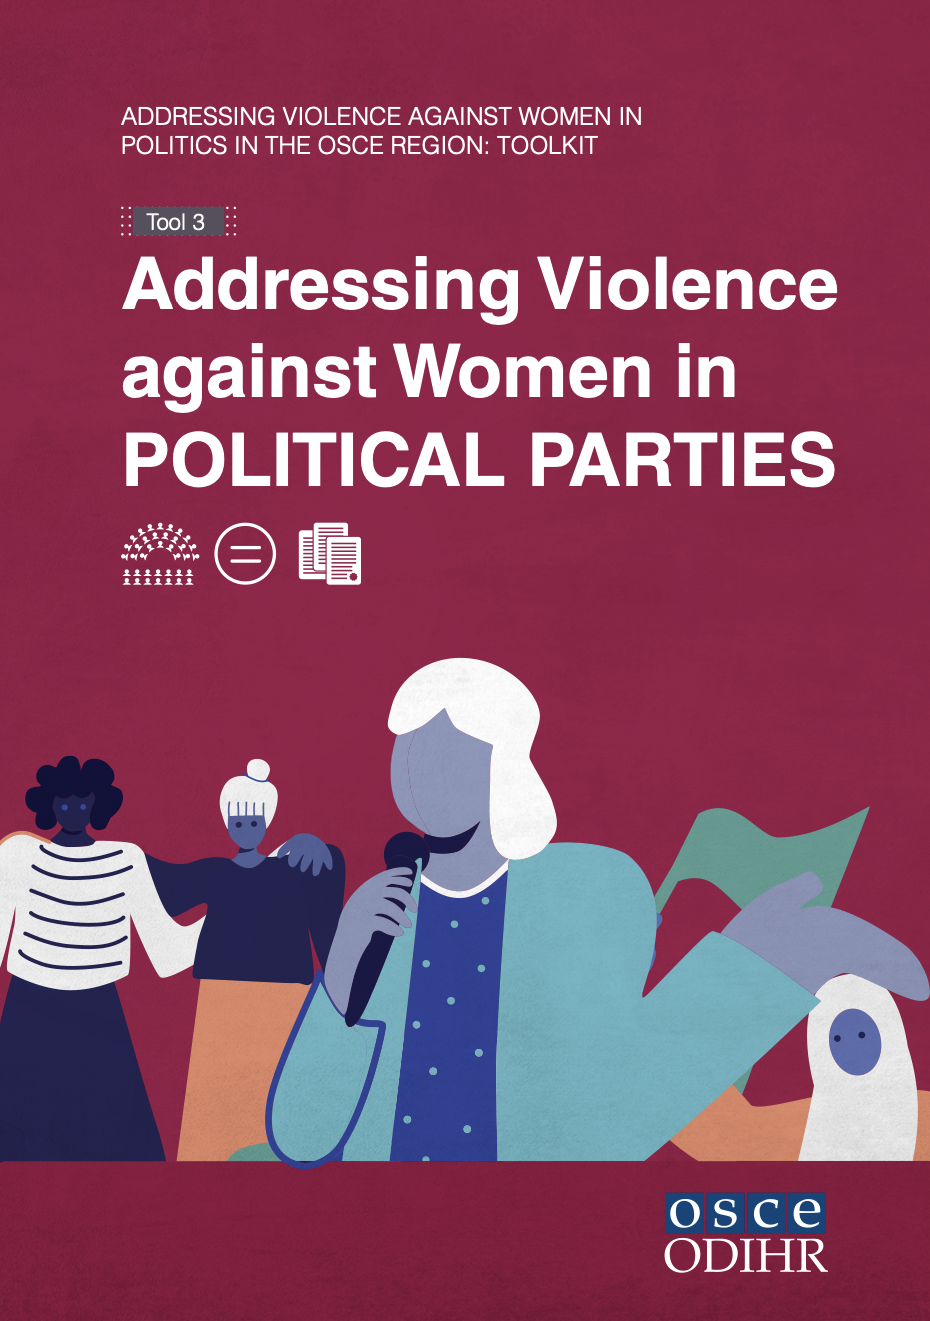 Addressing Violence against Women in Political Parties - Tool 3